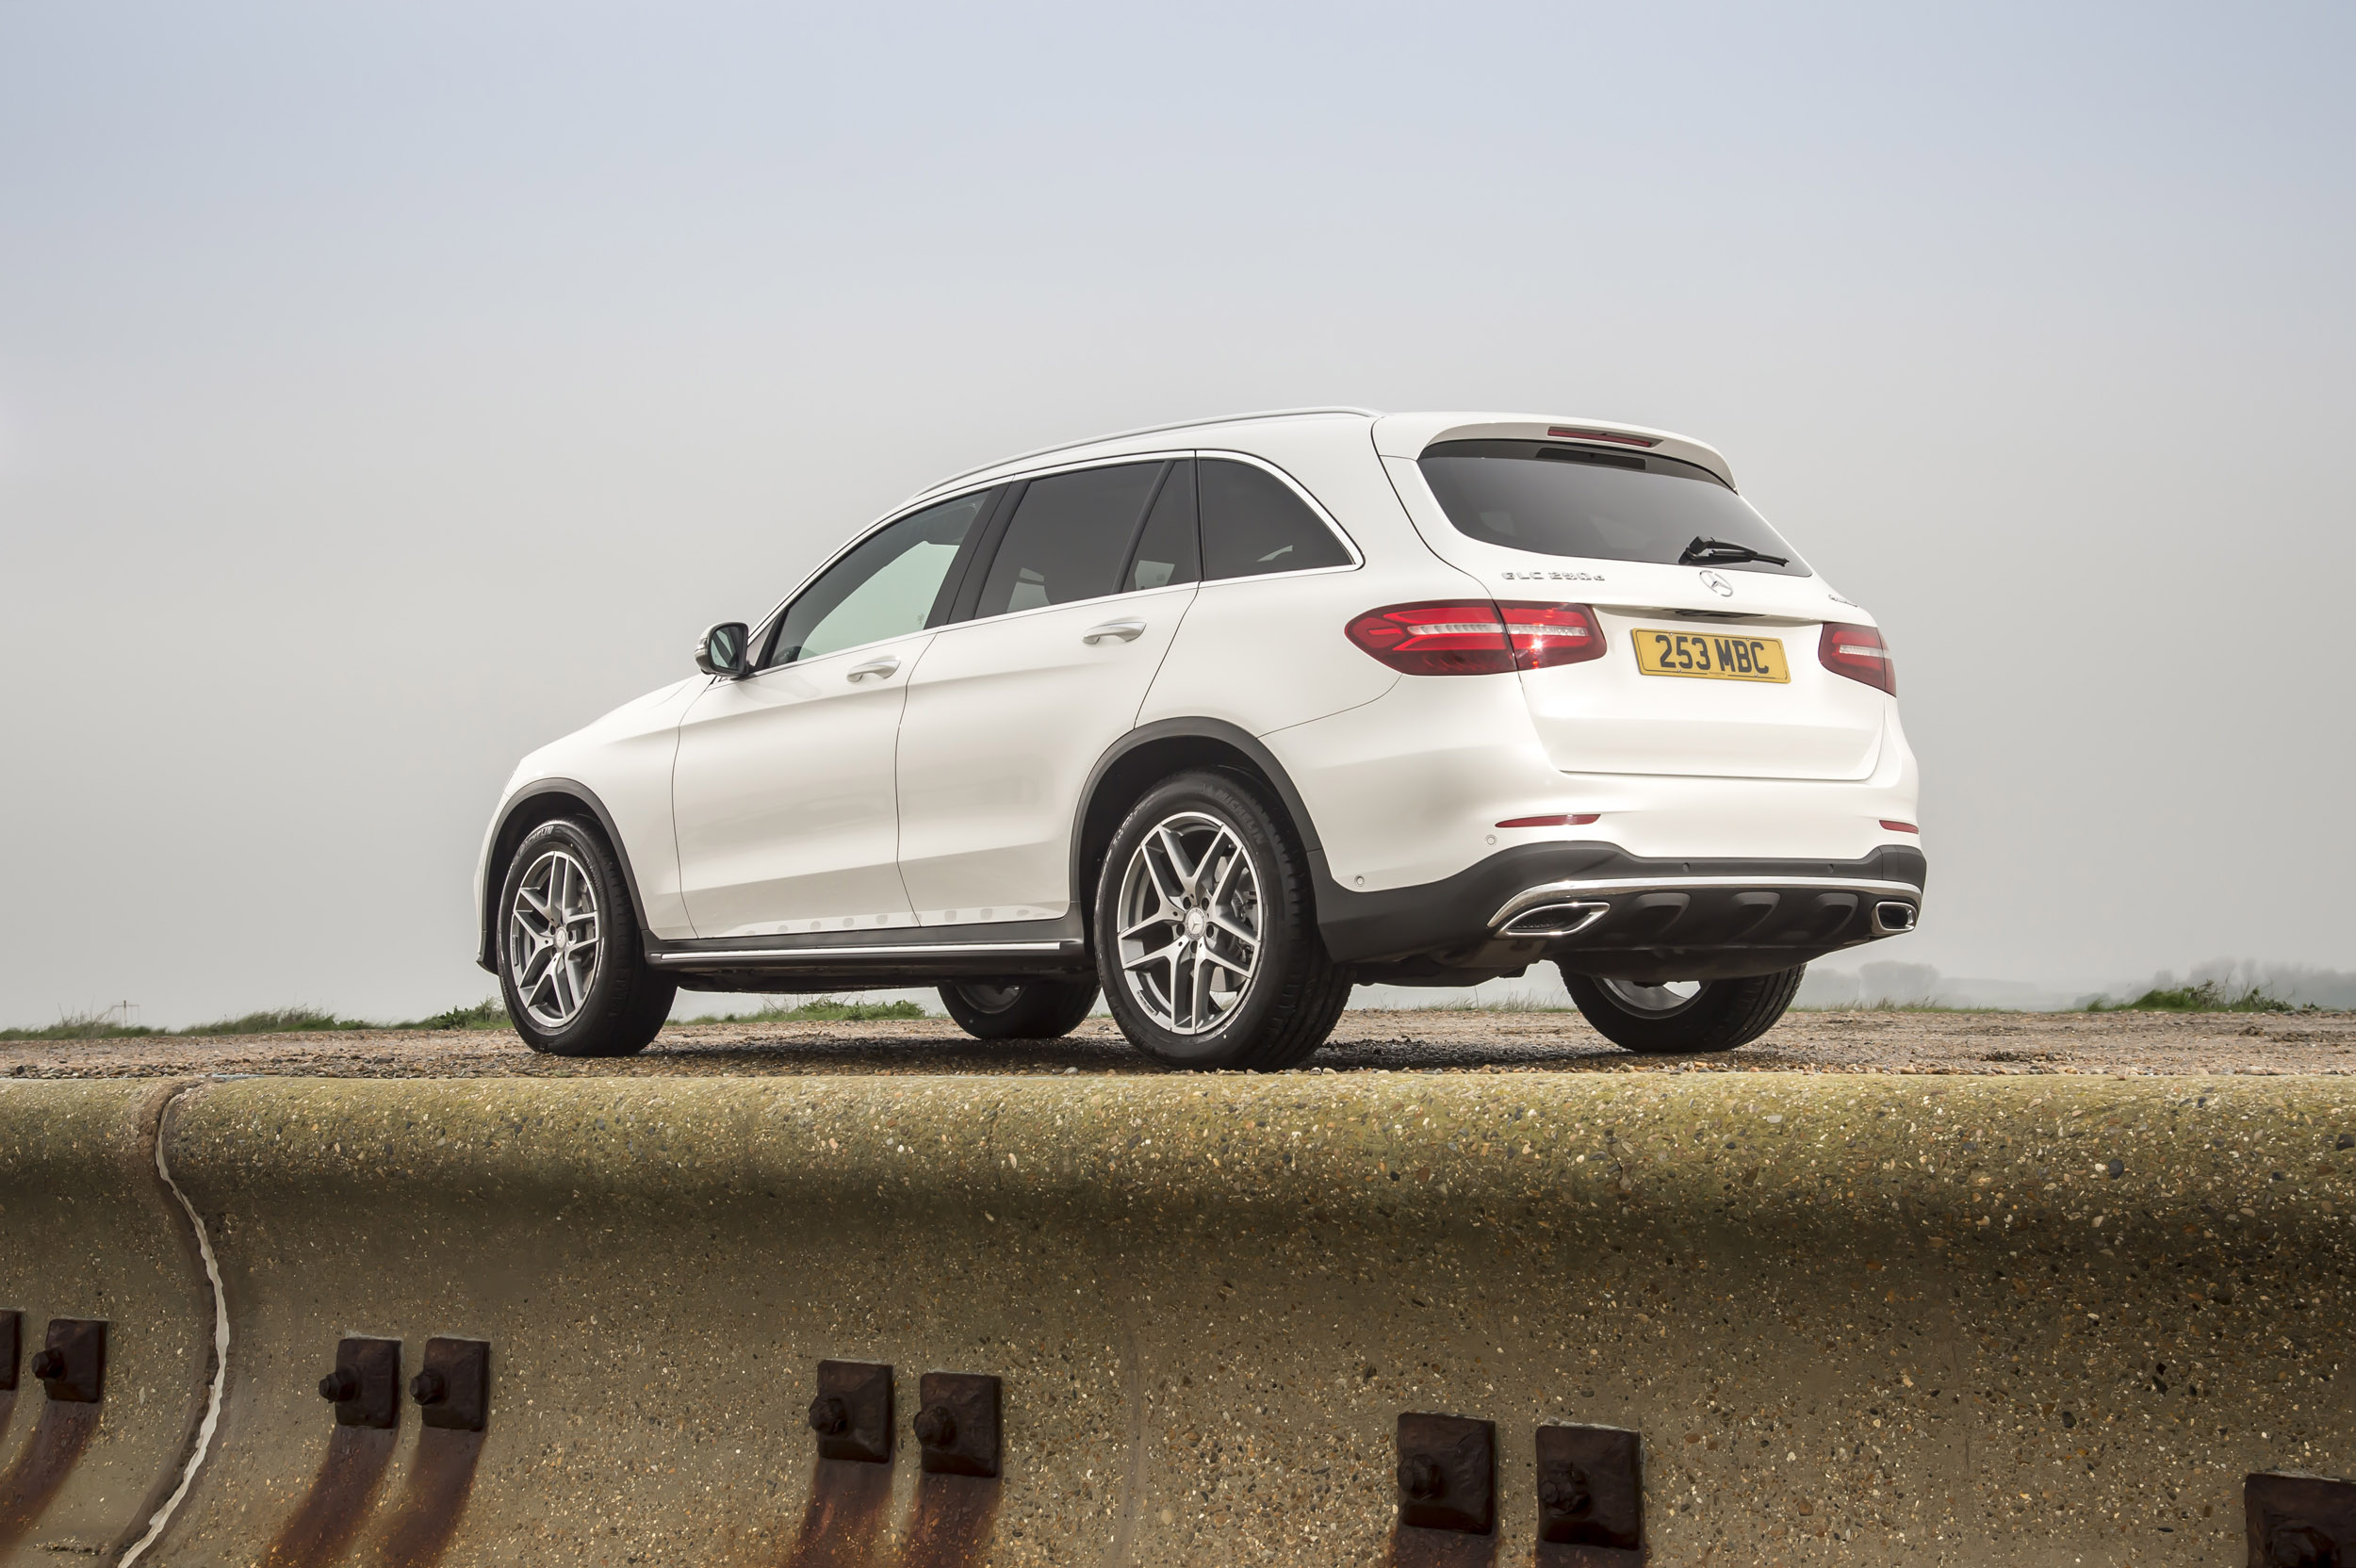 Mercedes Benz Glc Review Prices Specs And 0 60 Time Evo